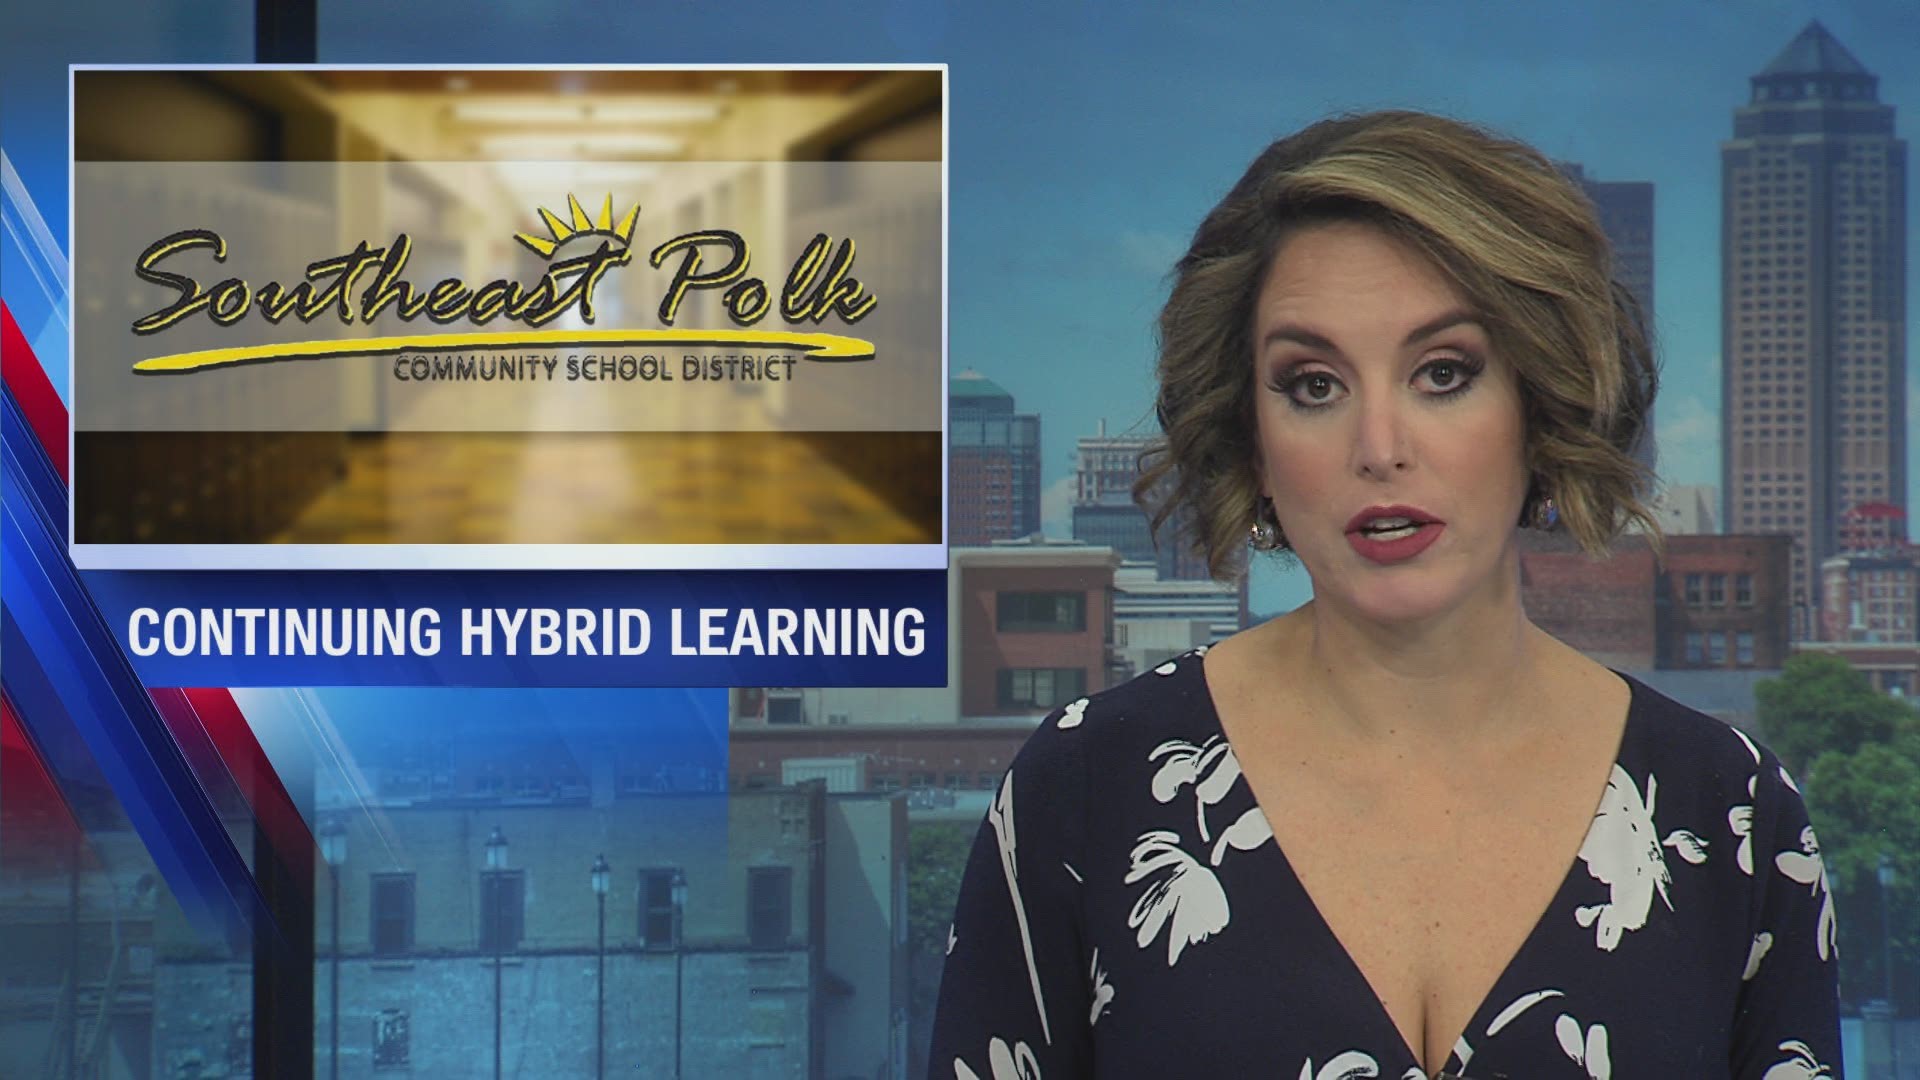 The school board voted to continue with the hybrid learning model Monday.